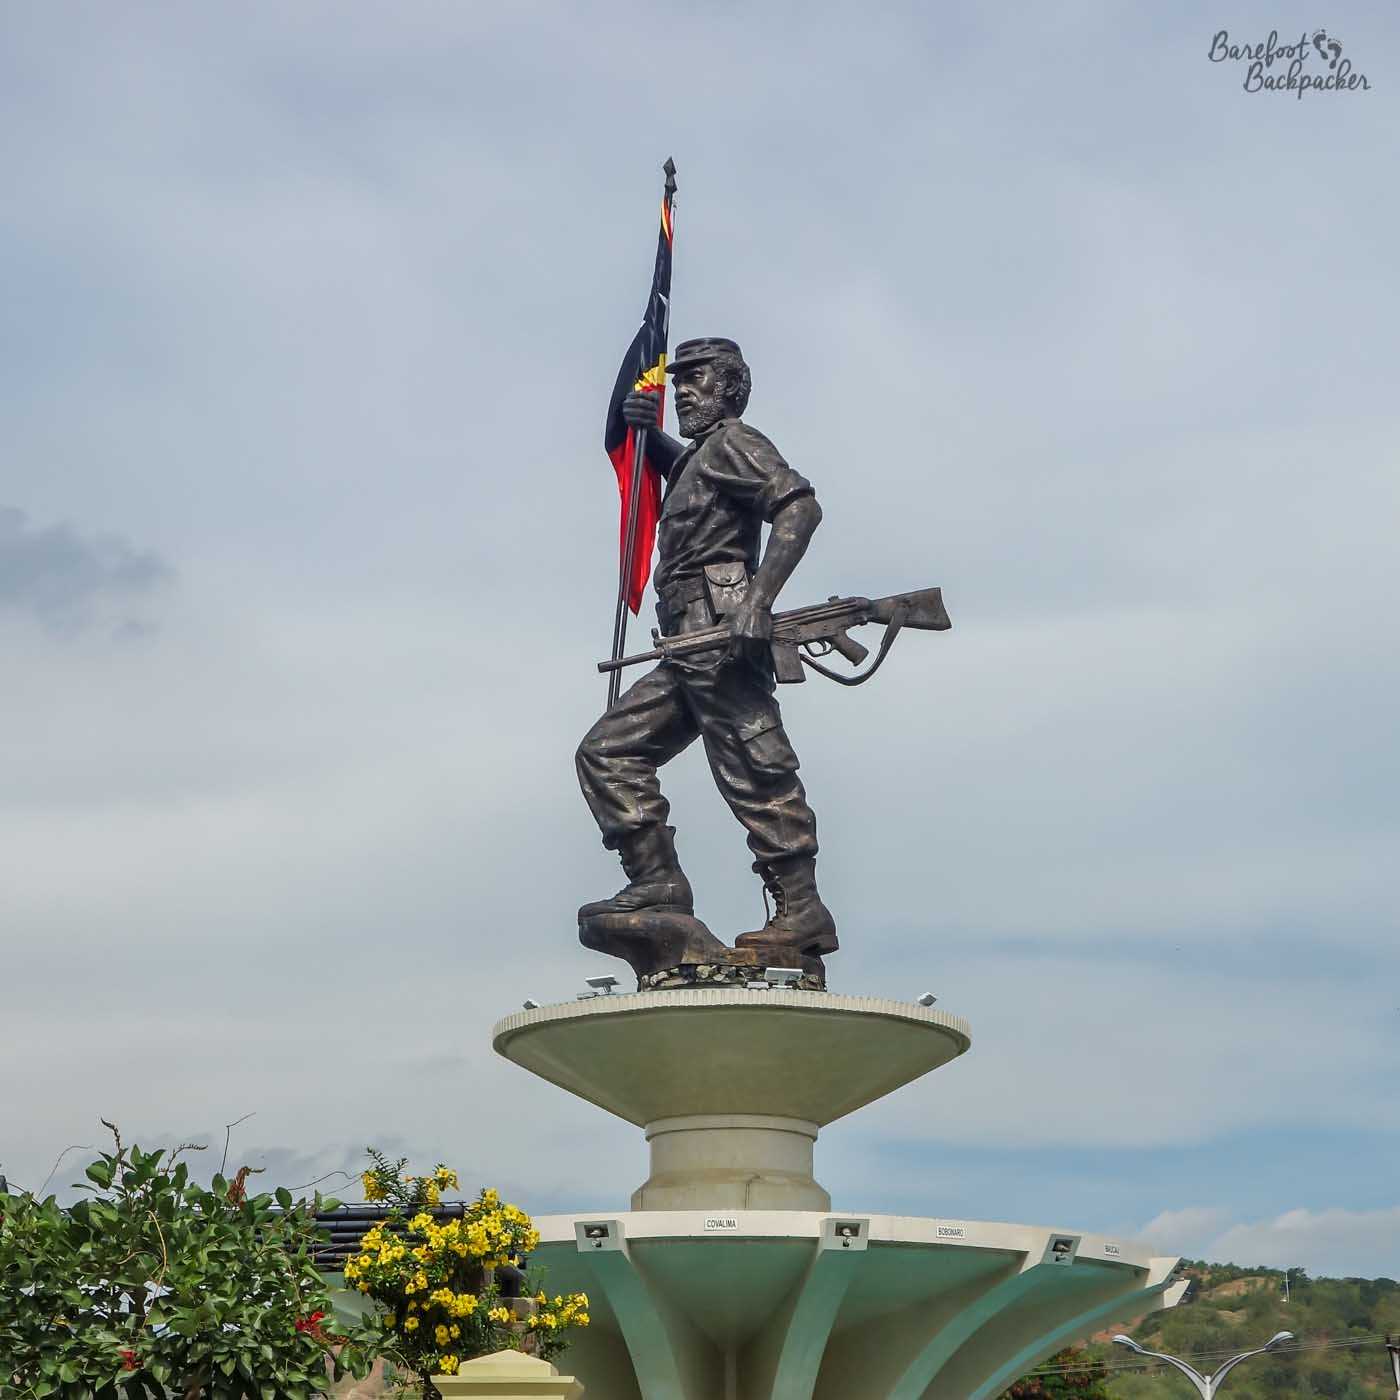 Statue on a circular pillar. He is a soldier. In his left hand he carries a rifle, in his right is the Timor-Leste flag.